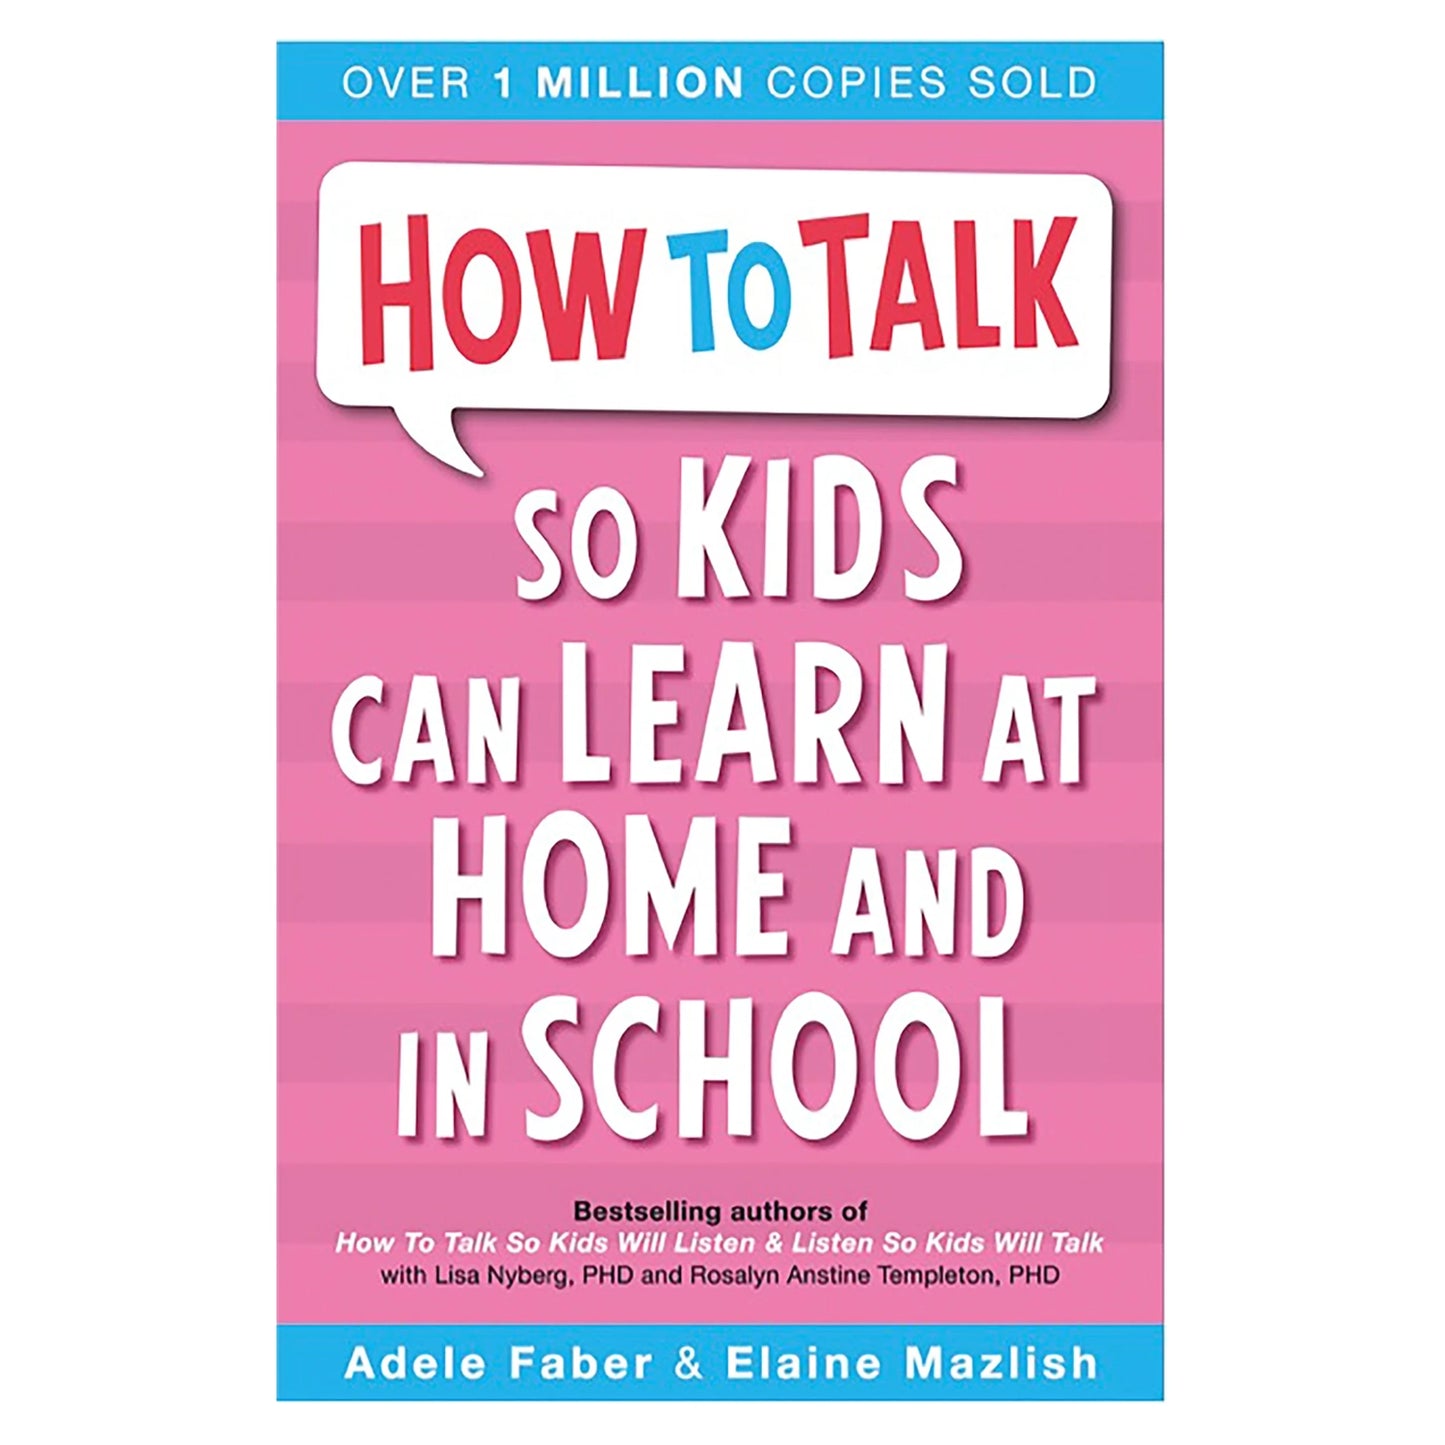 How to Talk So Kids Can Learn At Home and in School